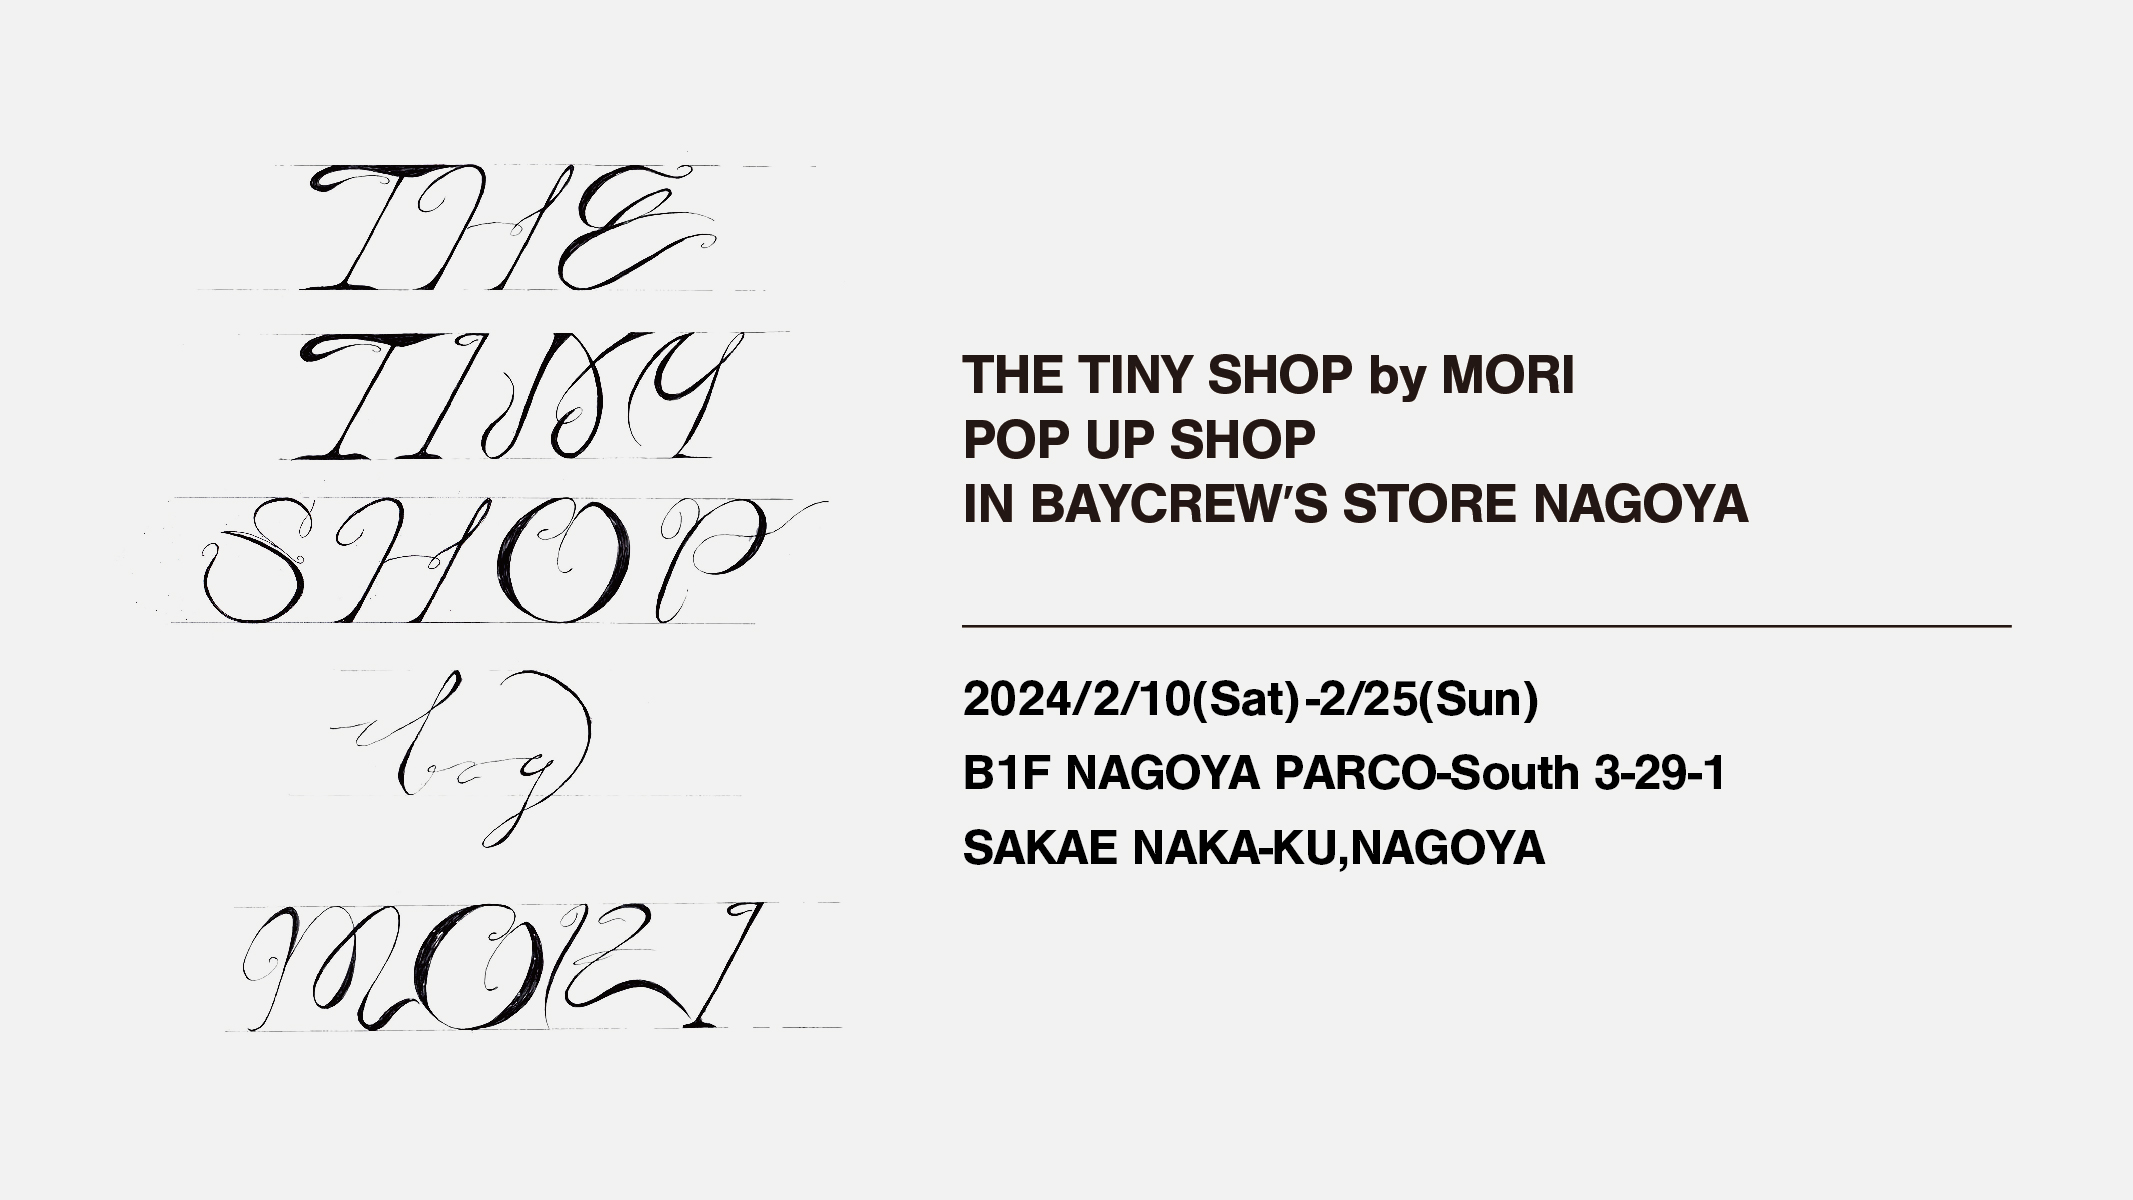 THE TINY SHOP by MORI POP UP SHOP in BAYCREW’S STORE NAGOYA